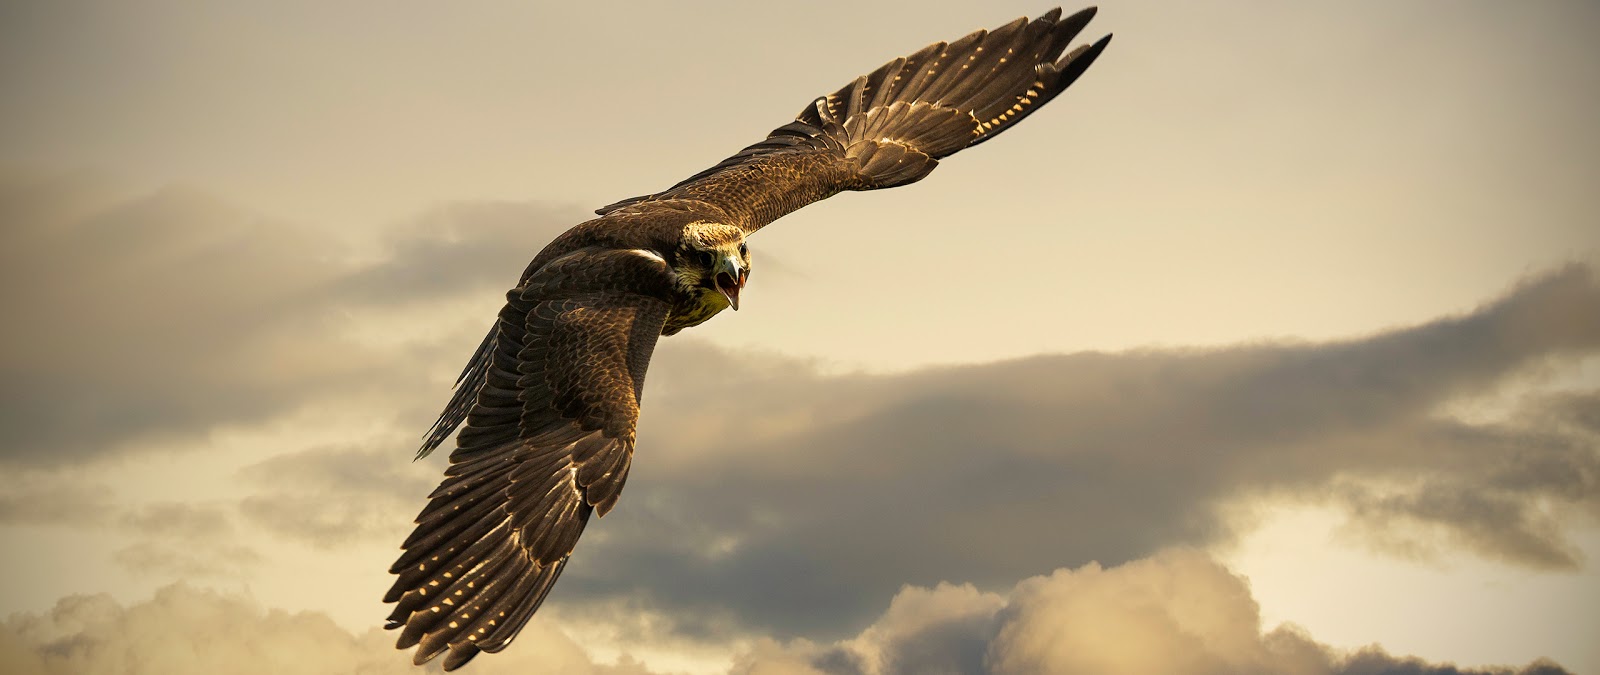 Ultra Wide Wallpaper - Flying Eagle On The Clouds - HD Wallpaper 